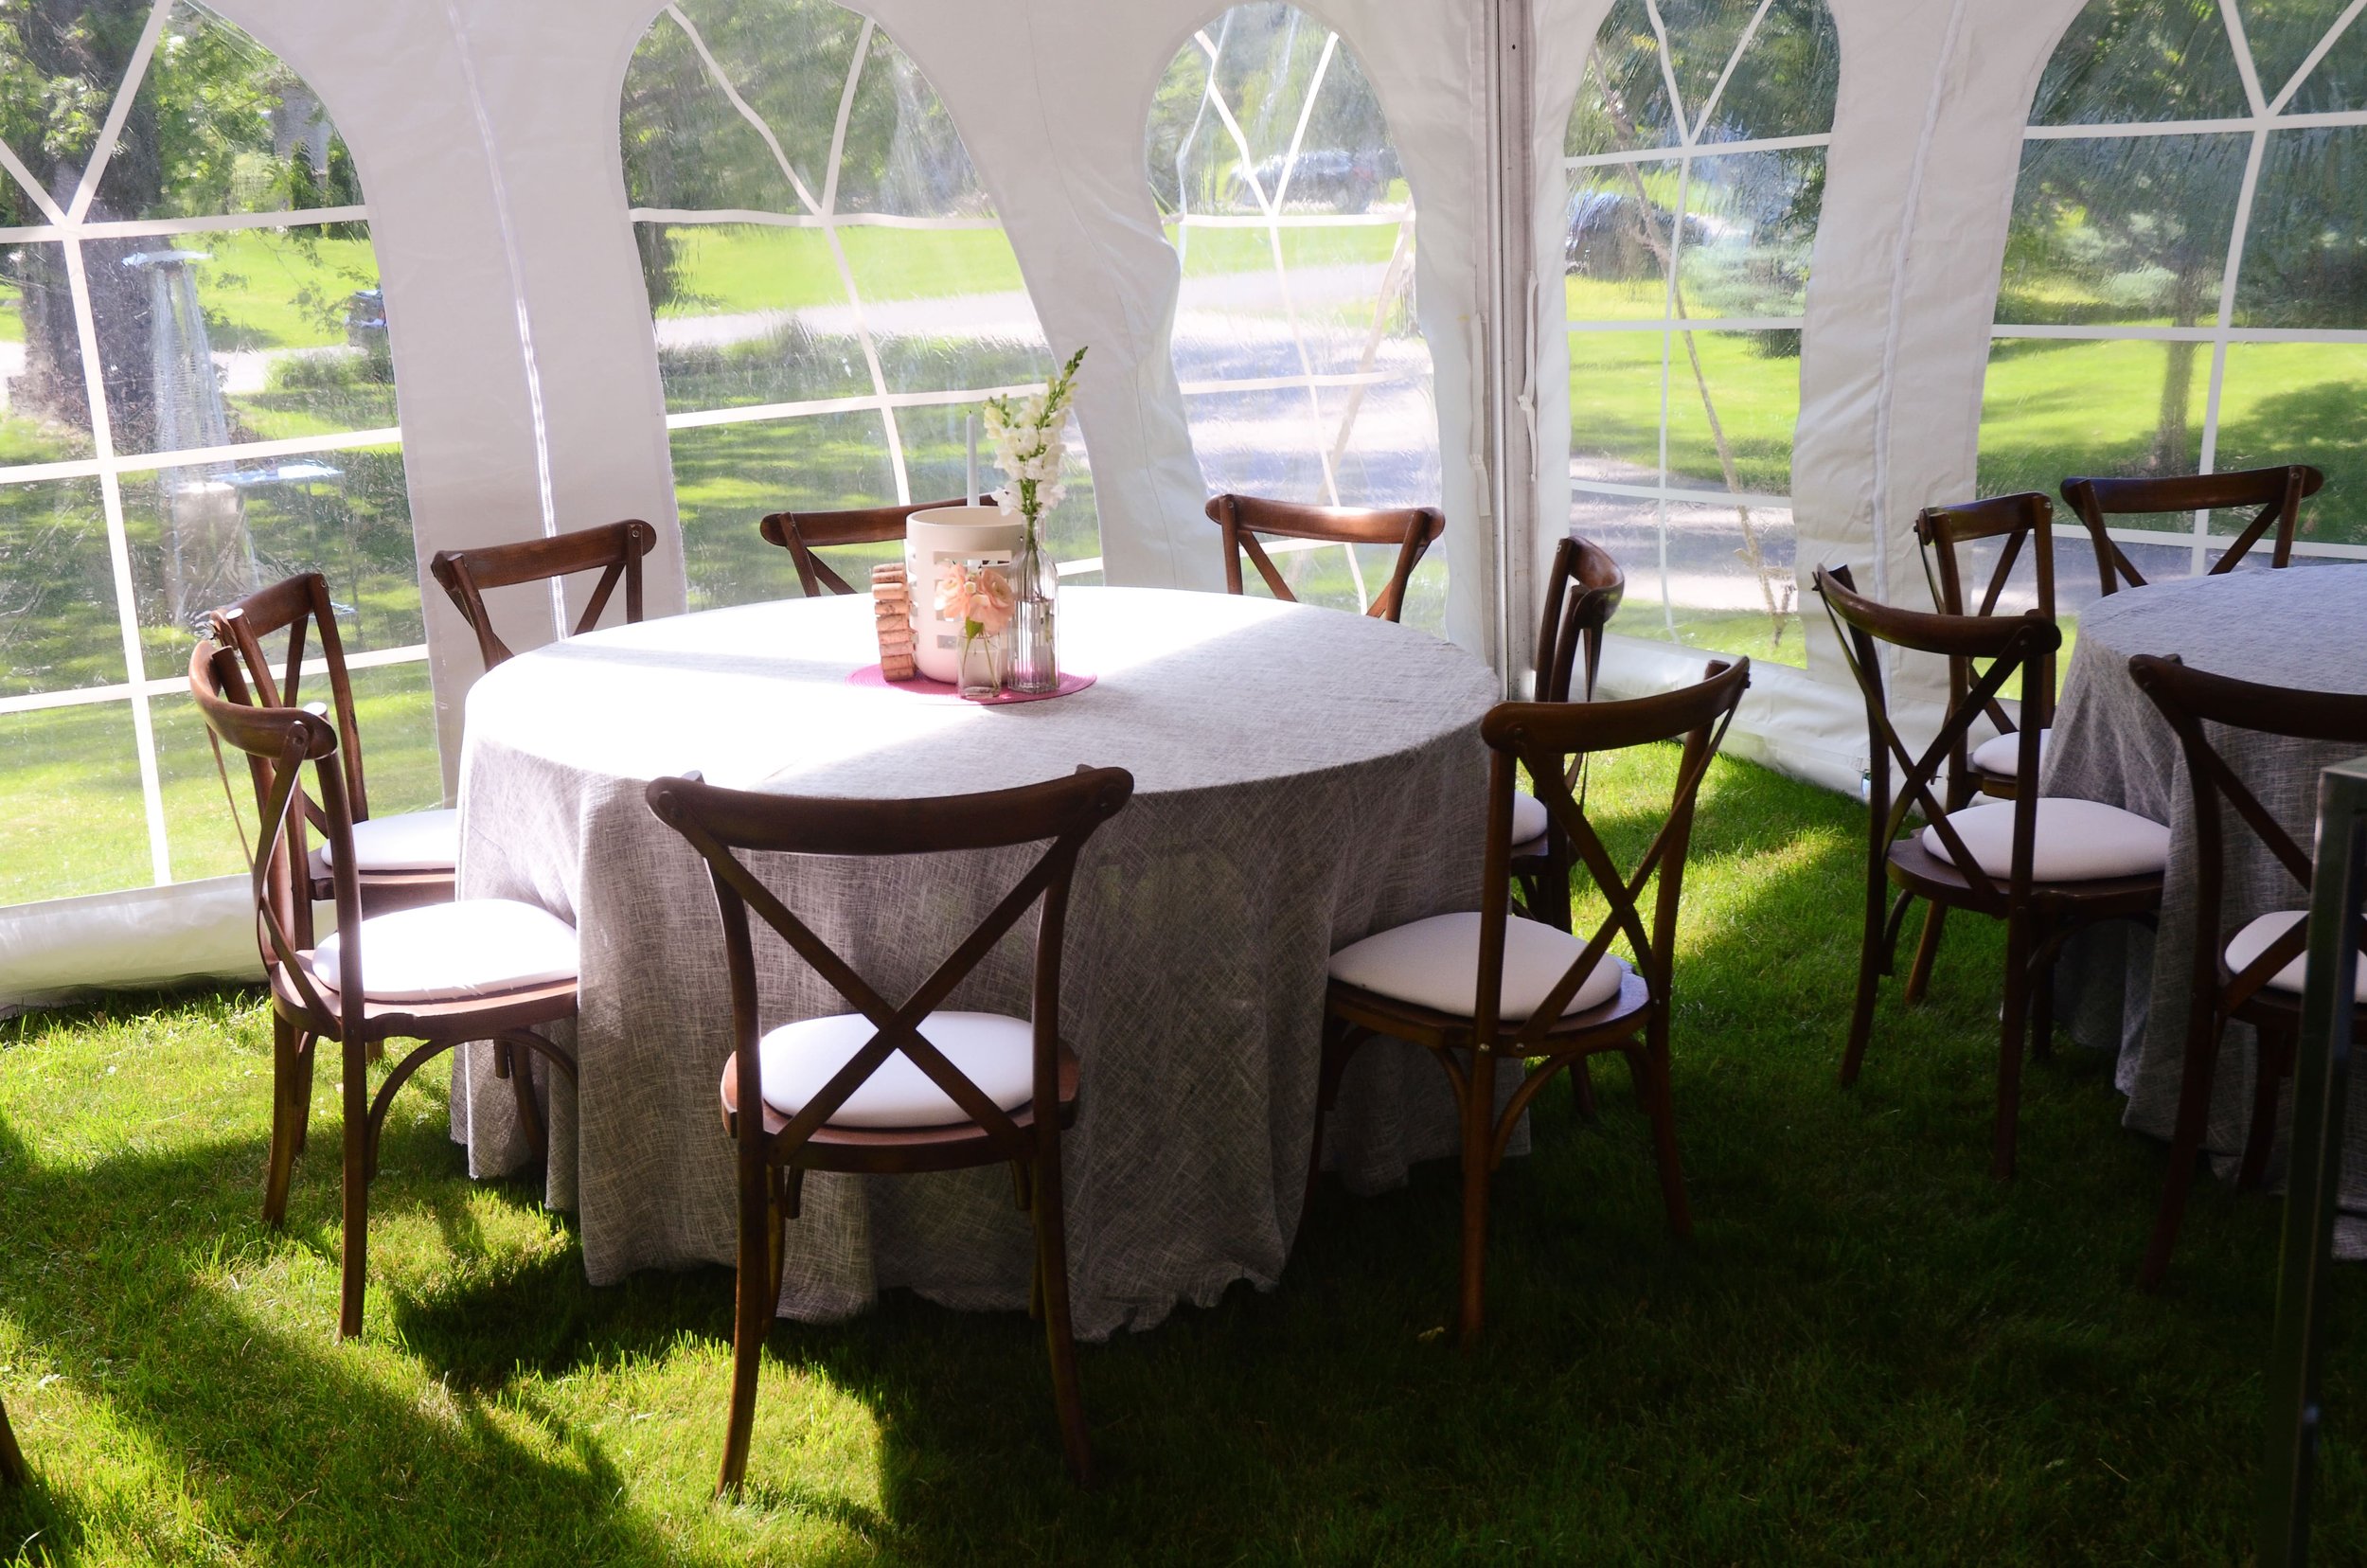 Backyard tented wedding reception table with linens and wood chairs